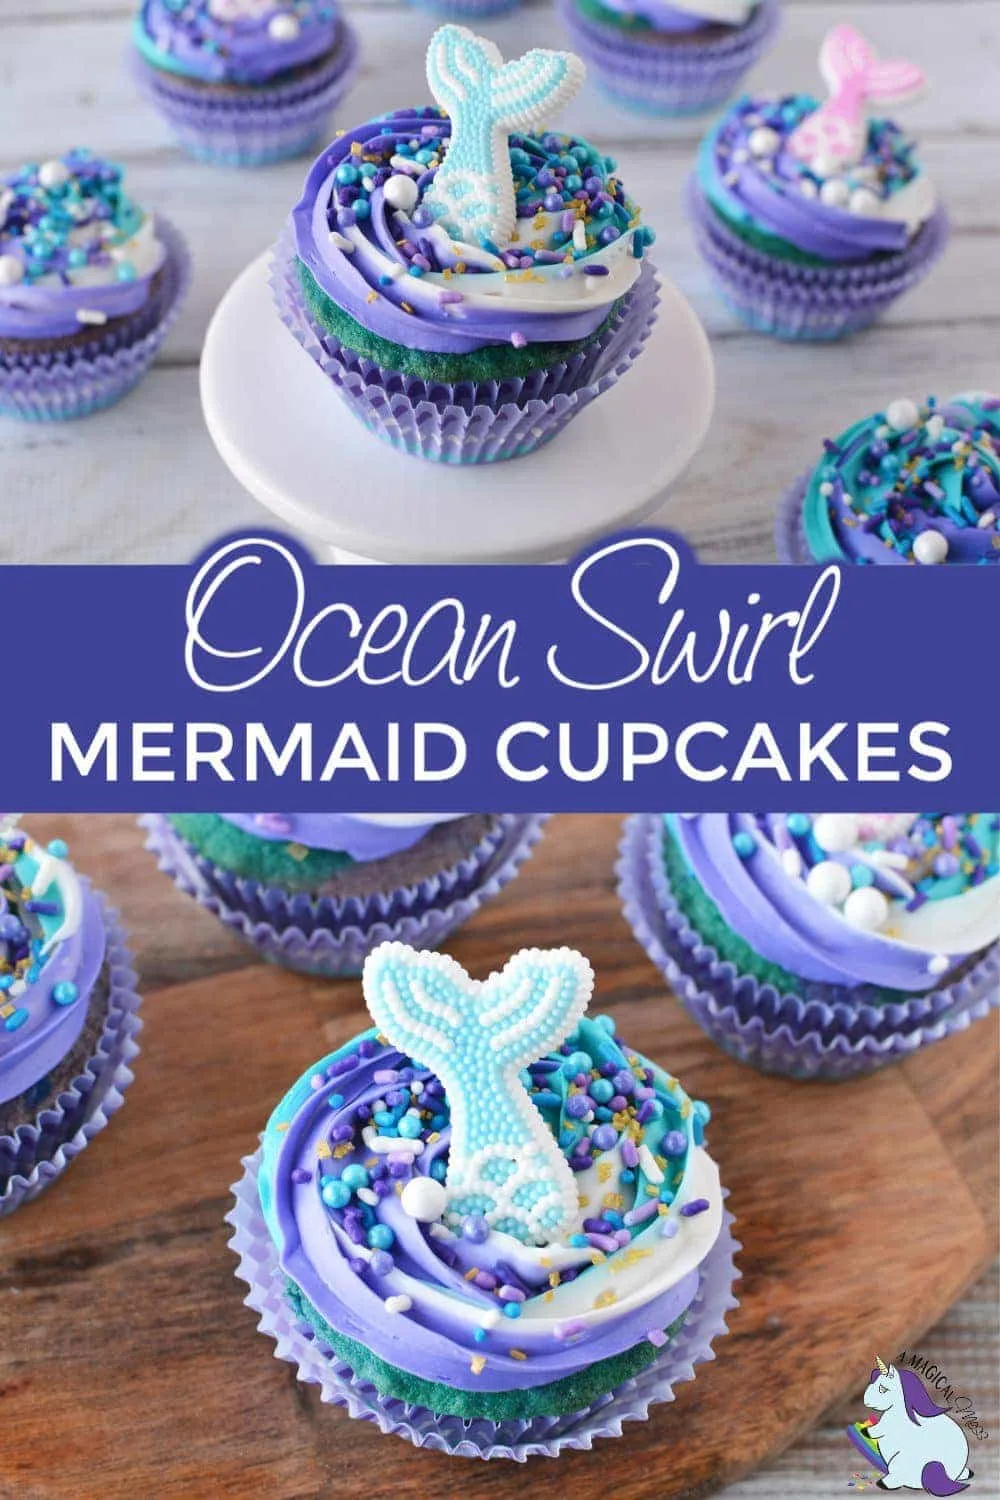 Mermaid cupcakes with a sugary fin topping.